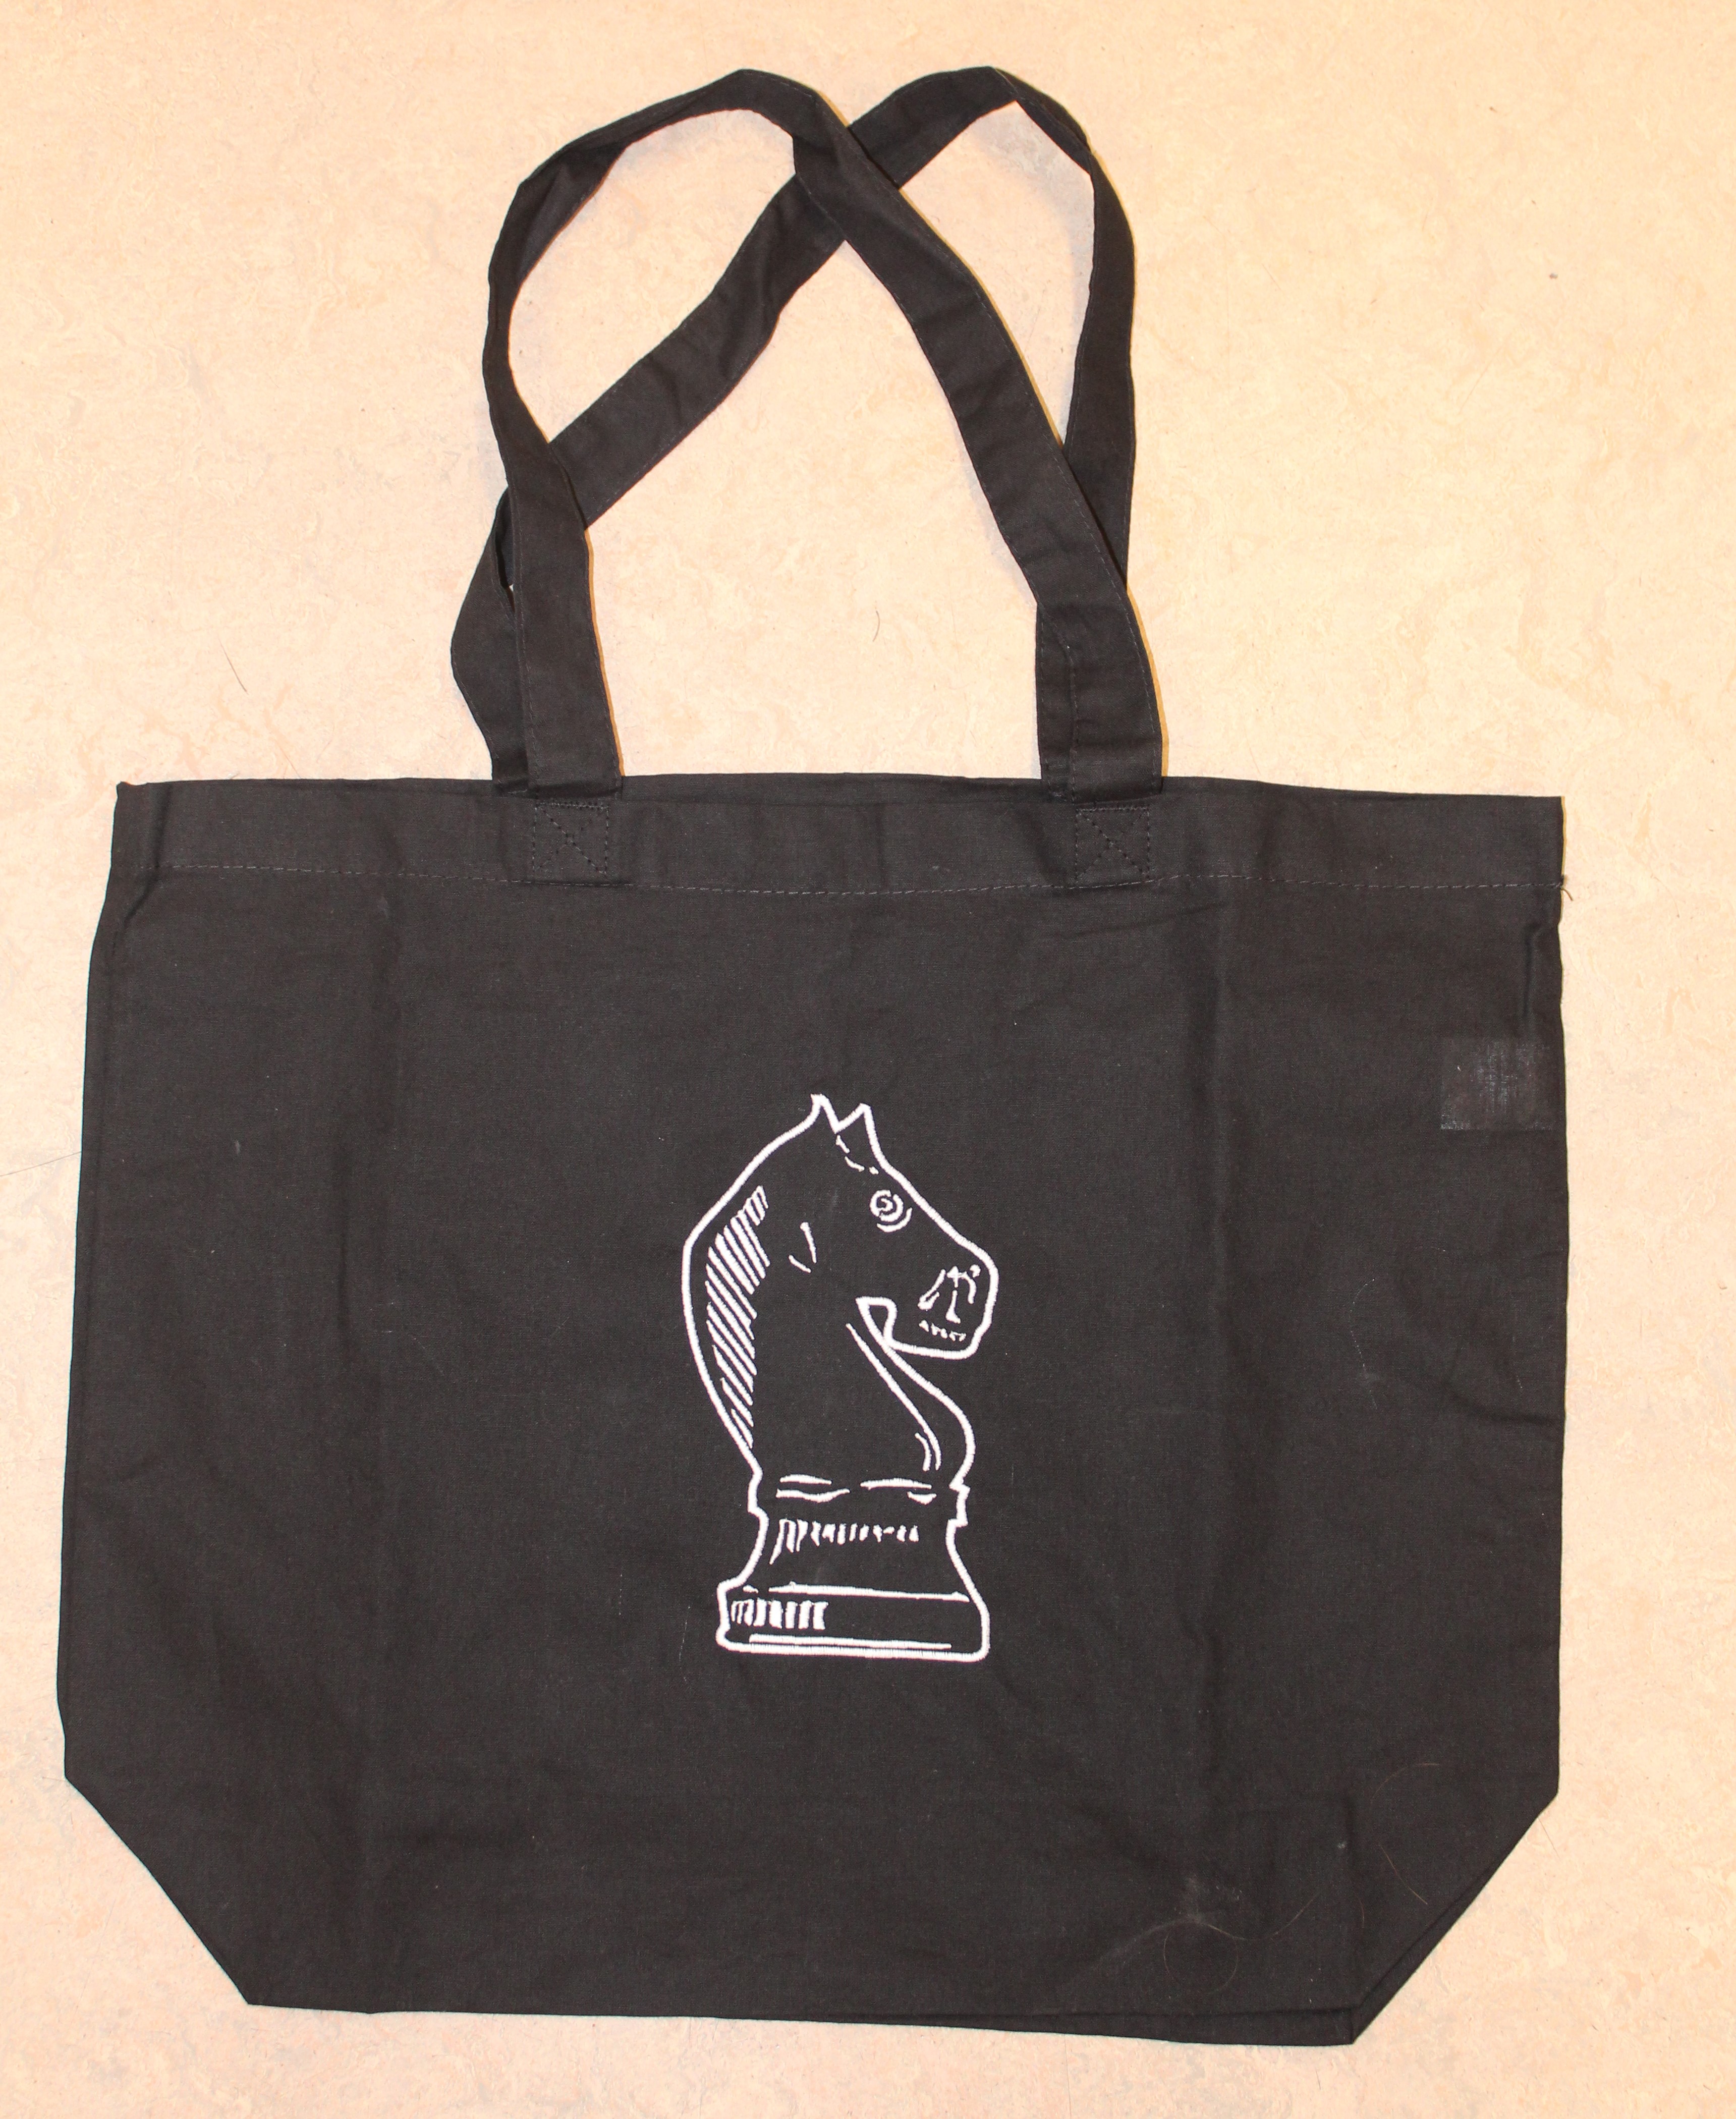 Black embroidered bag with logo knight